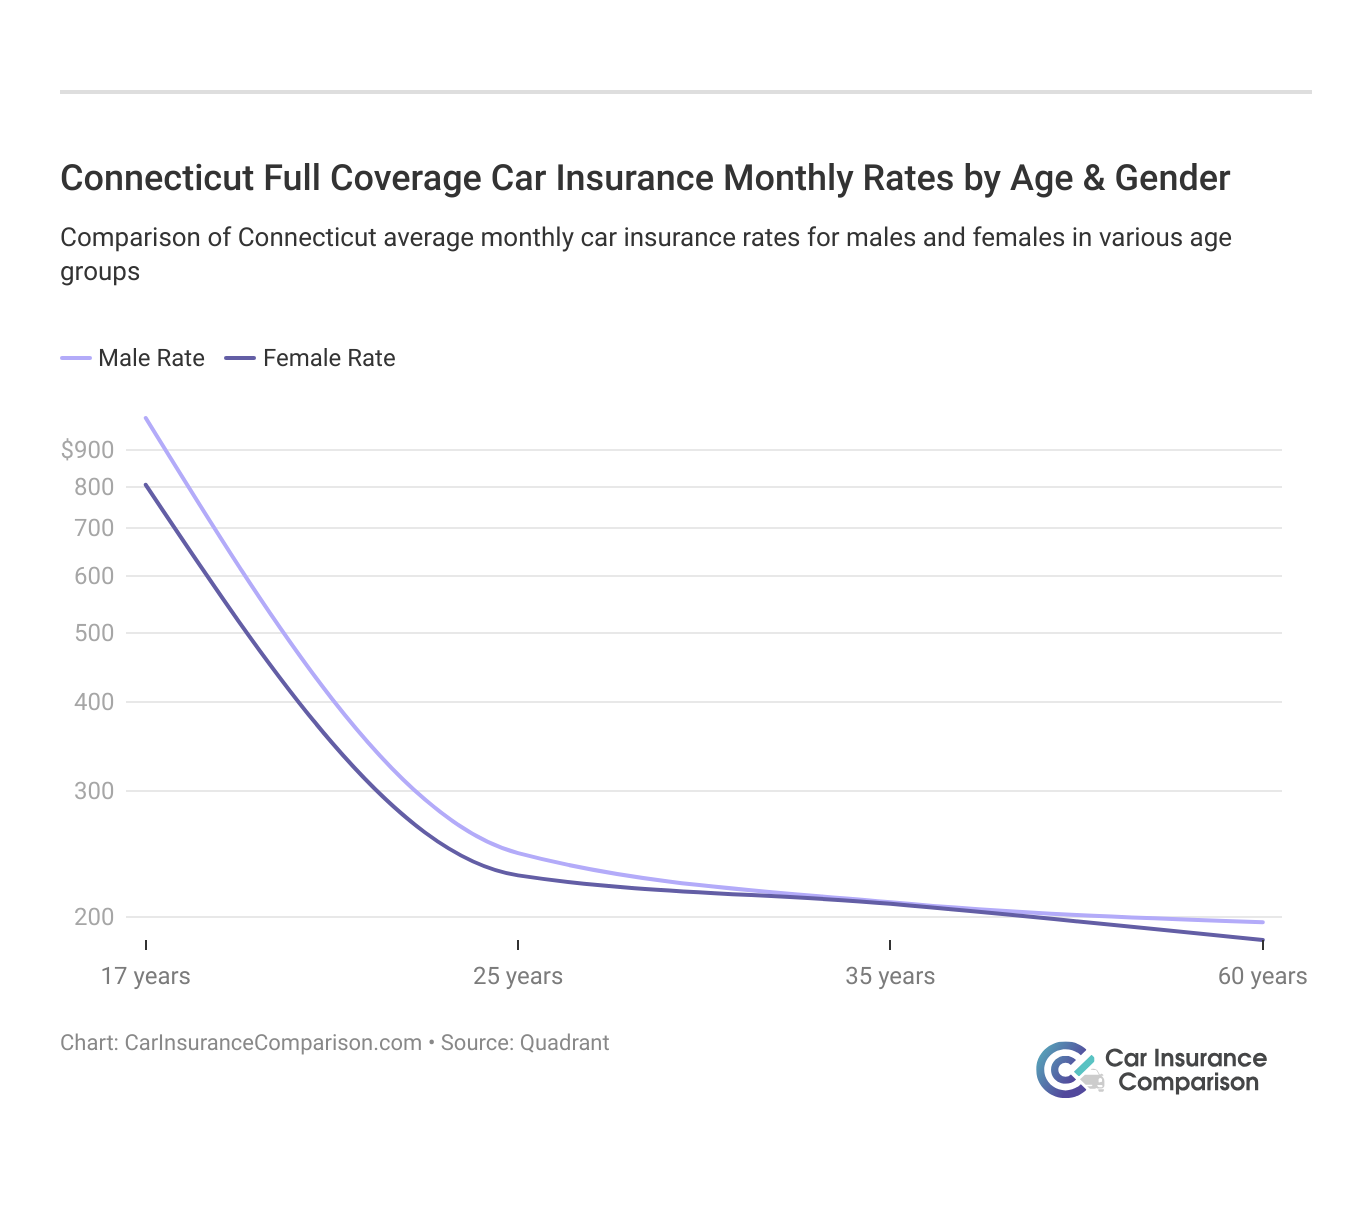 <h3>Connecticut Full Coverage Car Insurance Monthly Rates by Age & Gender</h3>